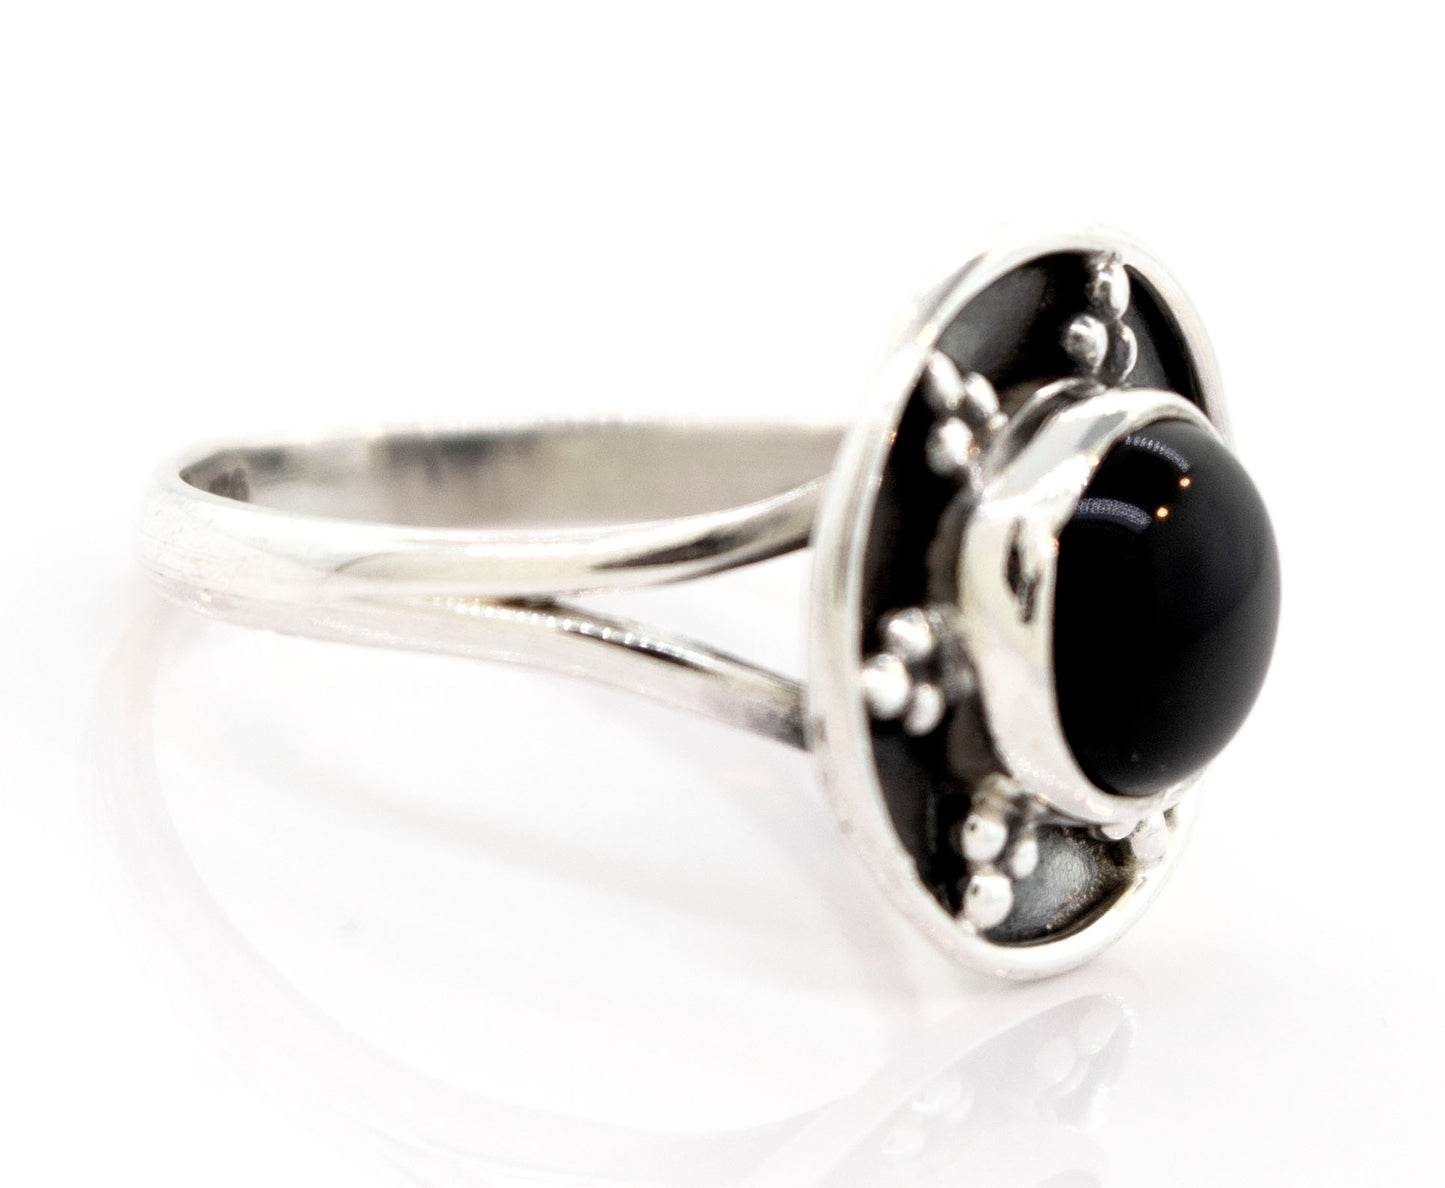 
                  
                    A Gemstone Ring With Unique Oxidized Design with a round black stone at its center, featuring a raised circular setting with small decorative elements around the stone.
                  
                